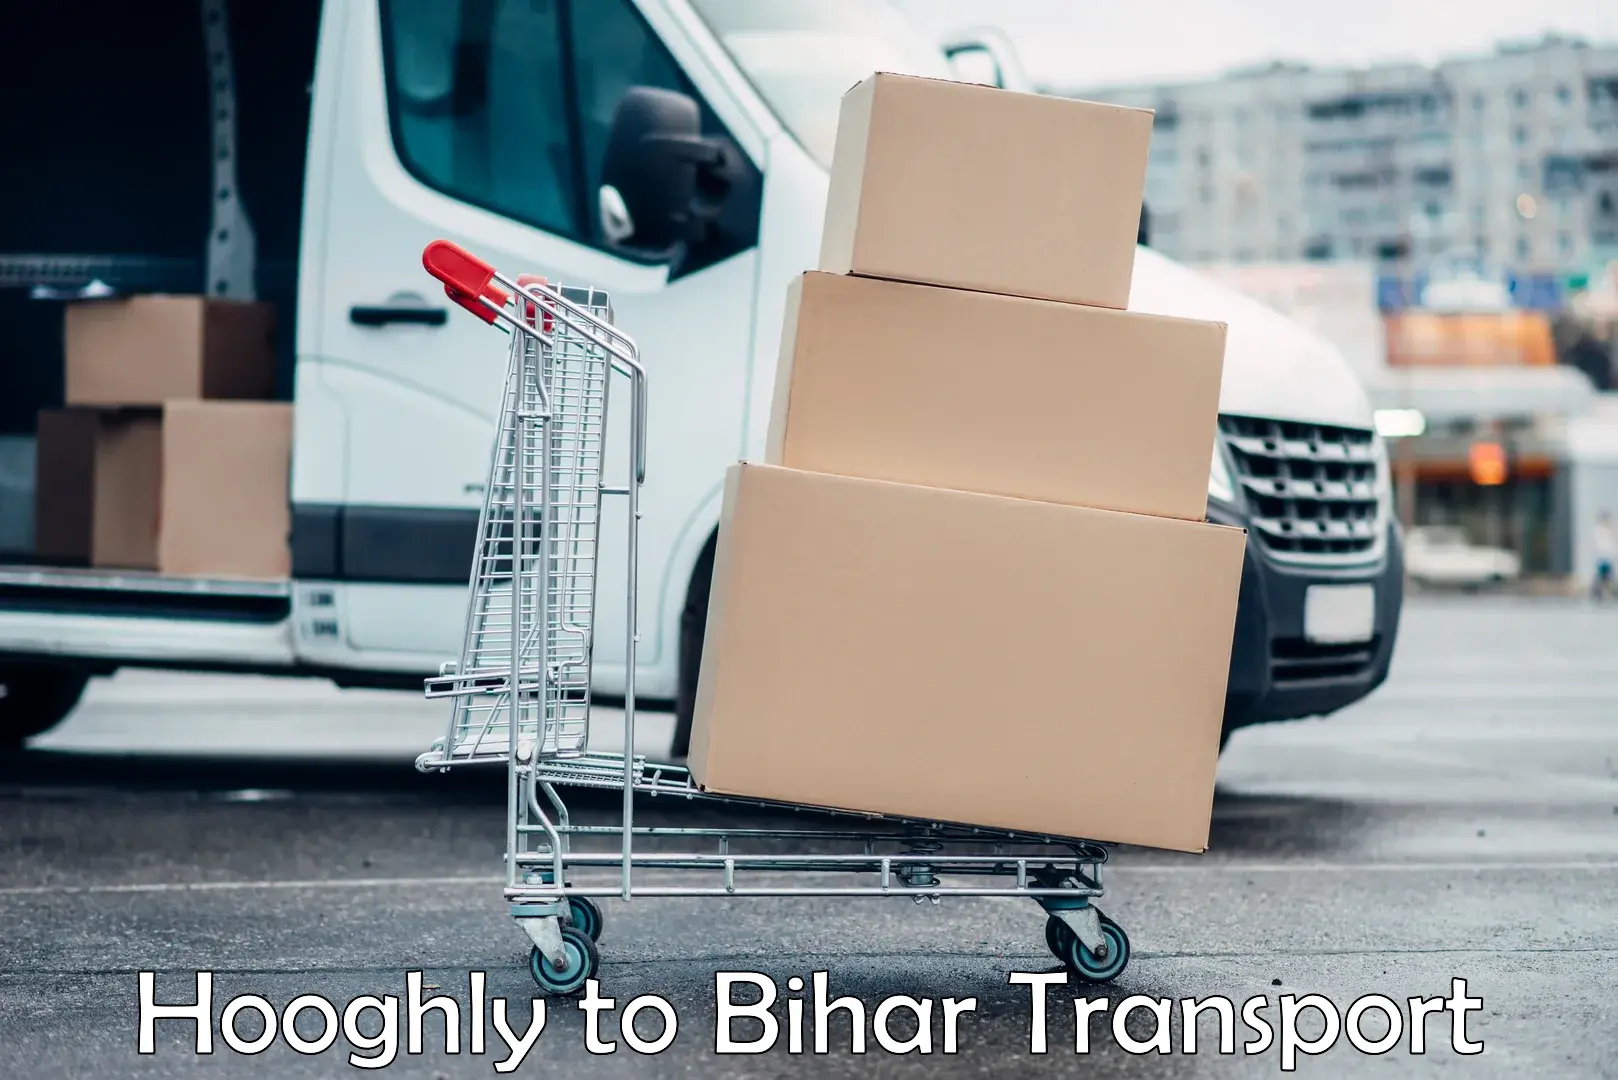 Vehicle transport services Hooghly to Piro